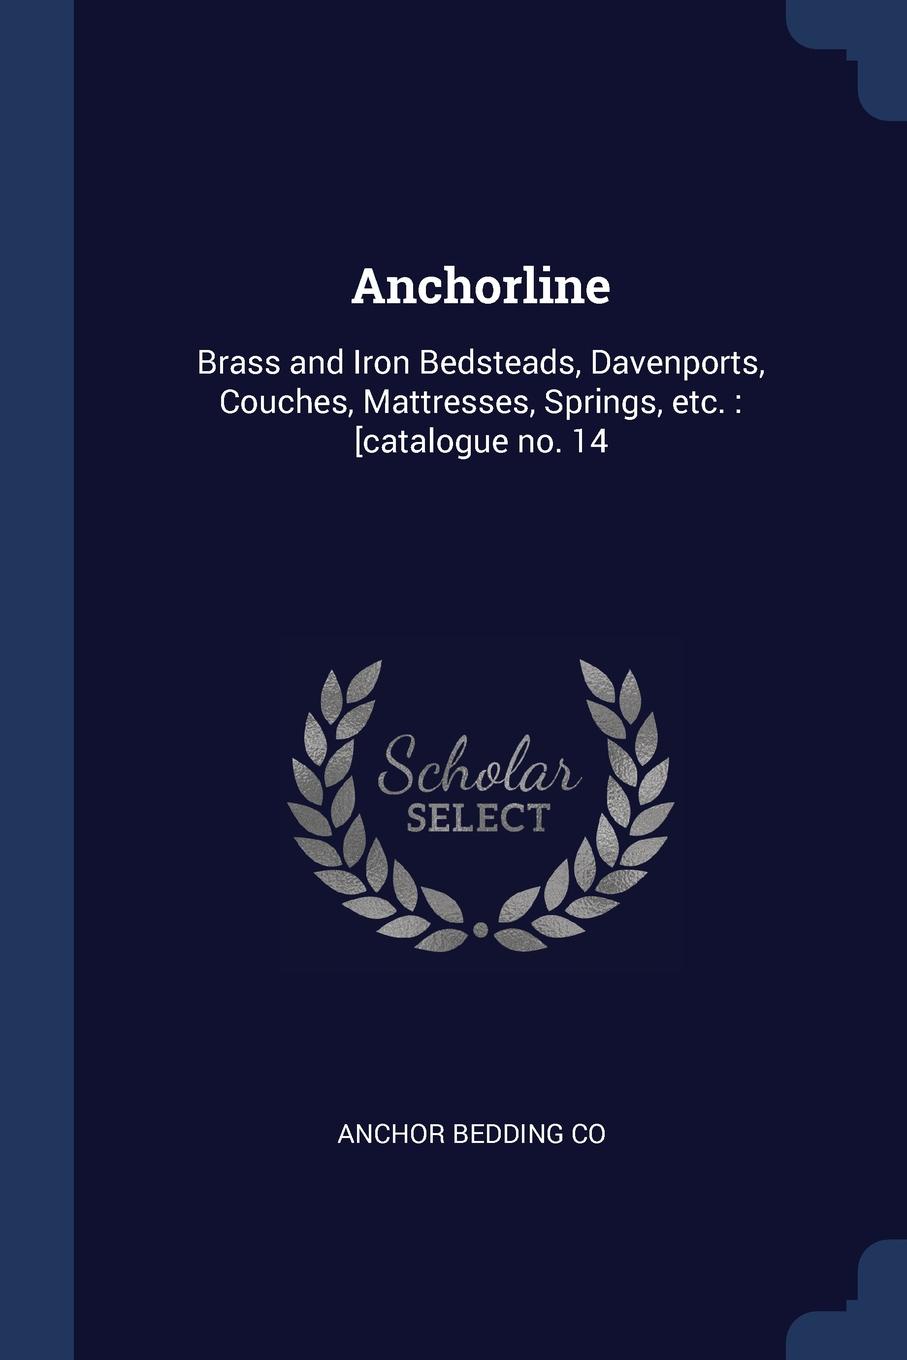 Anchorline. Brass and Iron Bedsteads, Davenports, Couches, Mattresses, Springs, etc. : .catalogue no. 14